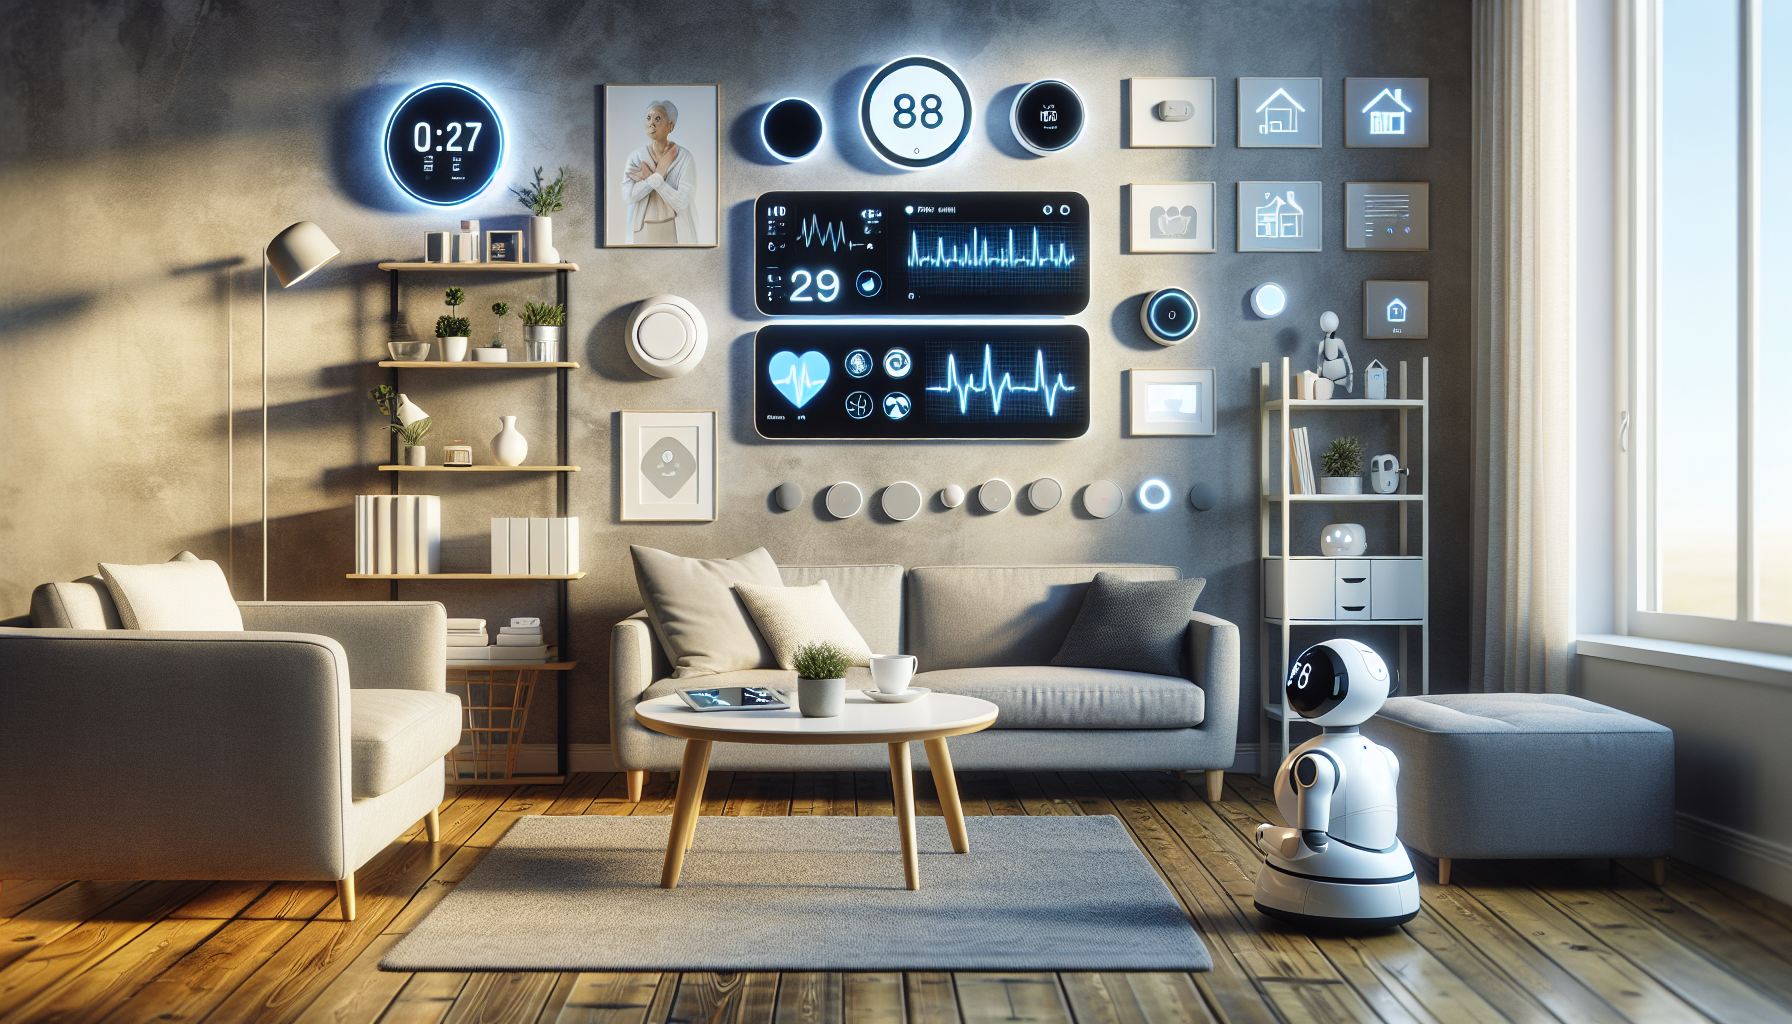 IoT devices in home health care